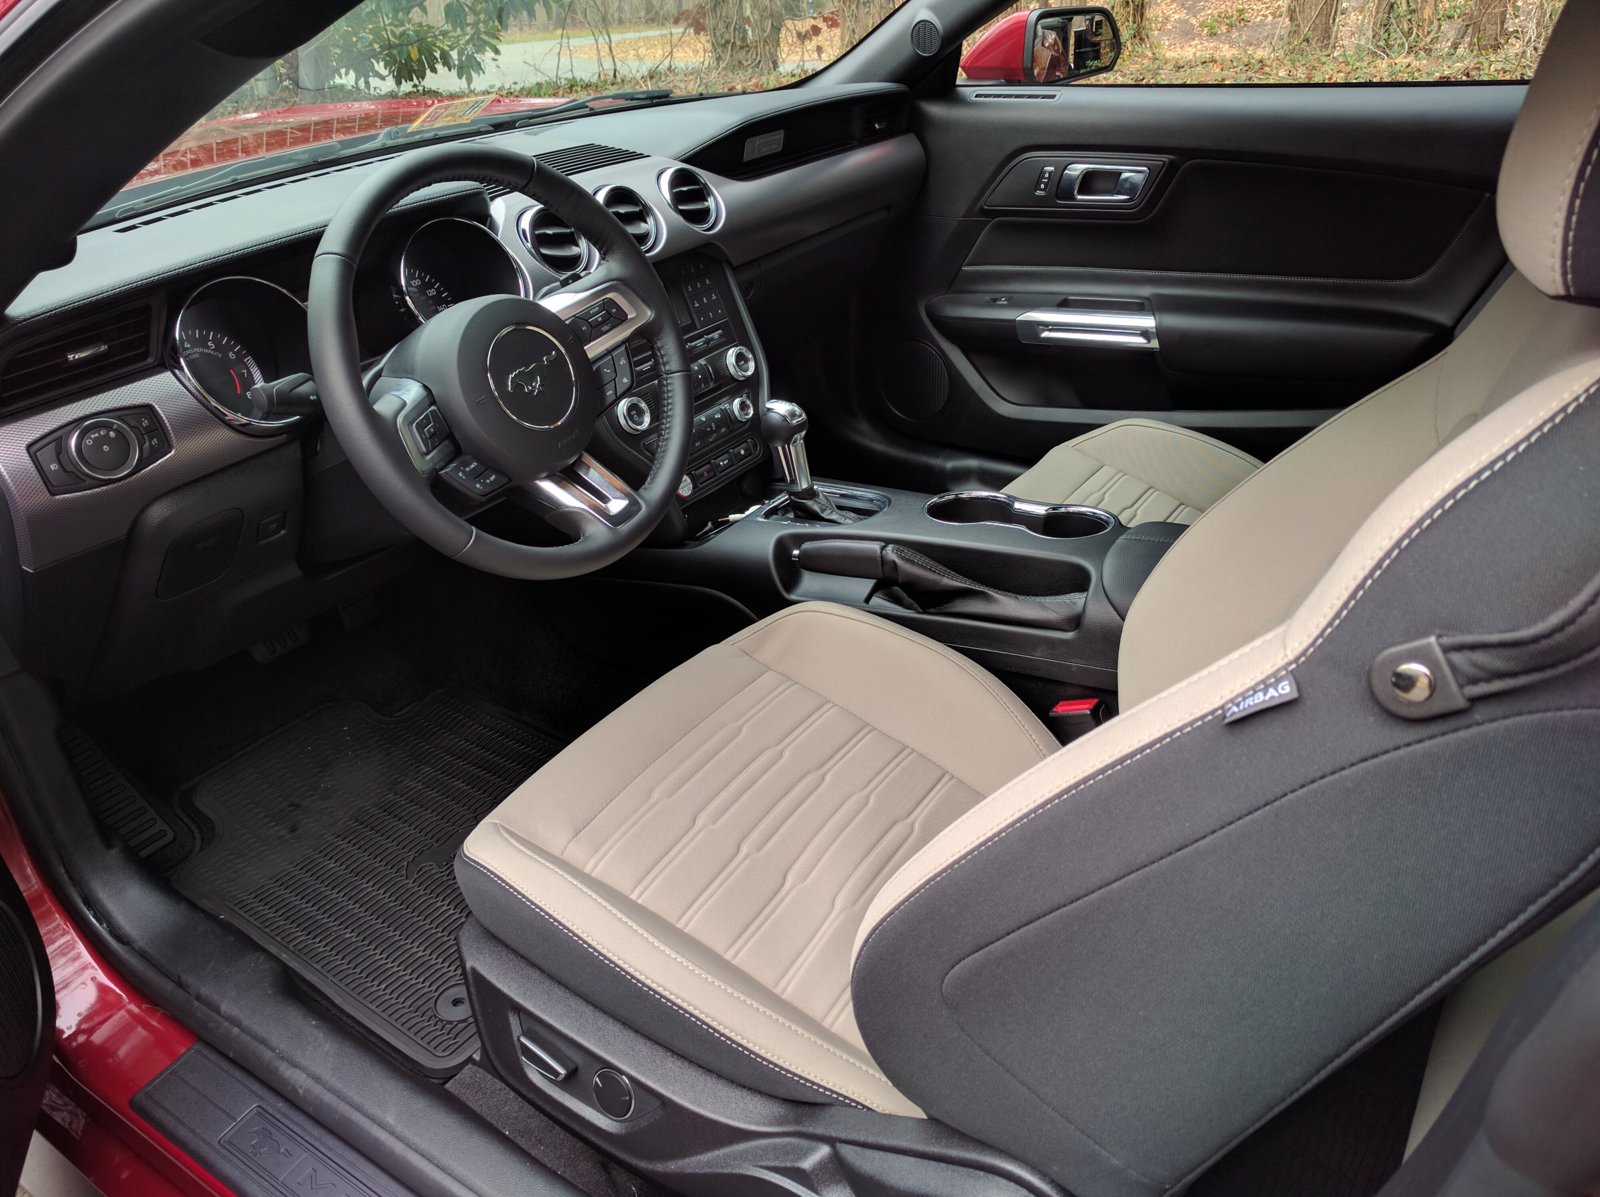 My Interior - Ceramic Seats and All-weather Floor Mats